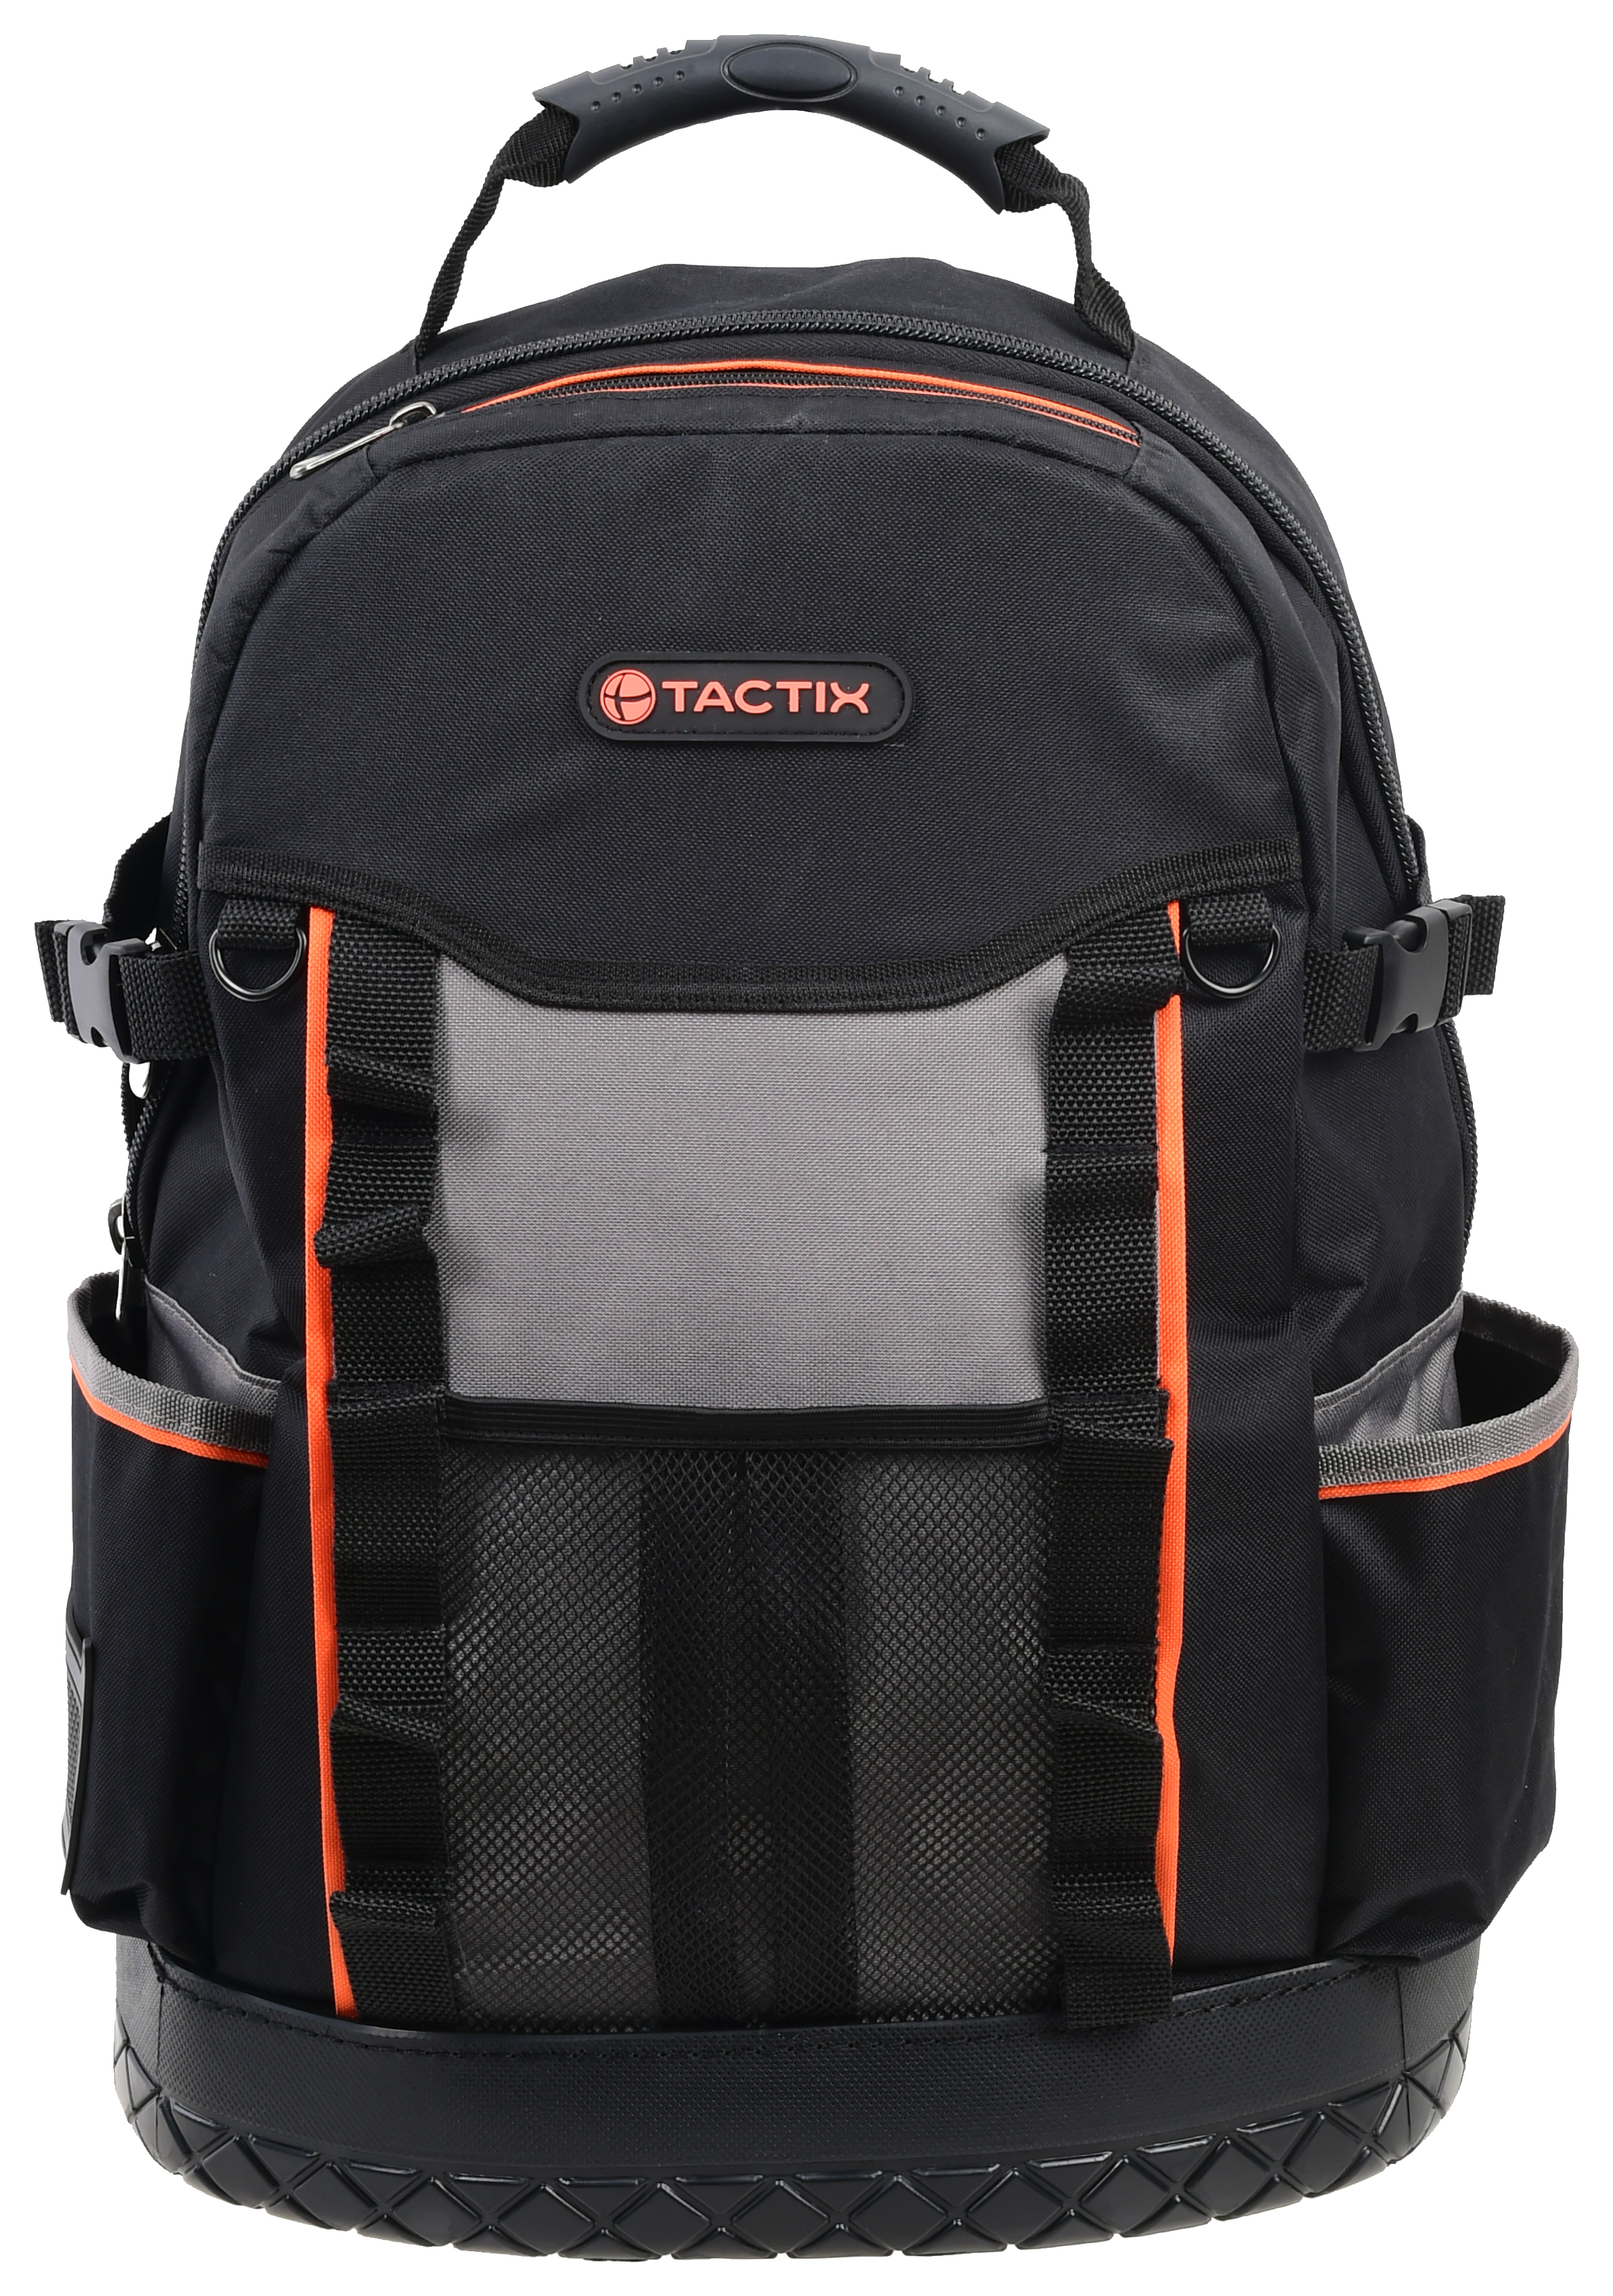 Image of Tactix Rugged Heavy Duty Tools Backpack